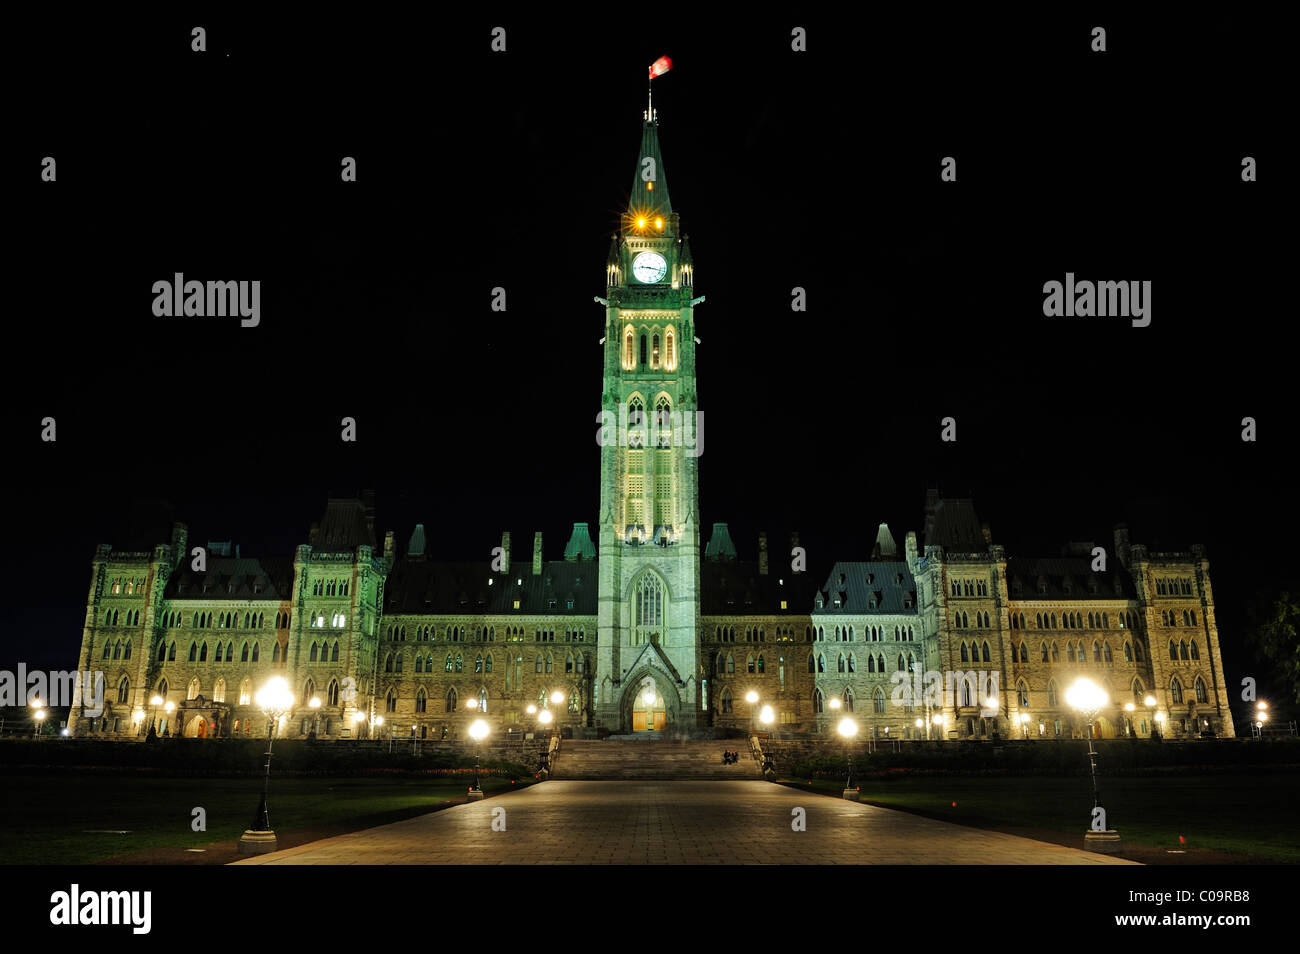 The government buildings in Ottawa, Ontario, Canada Stock Photo